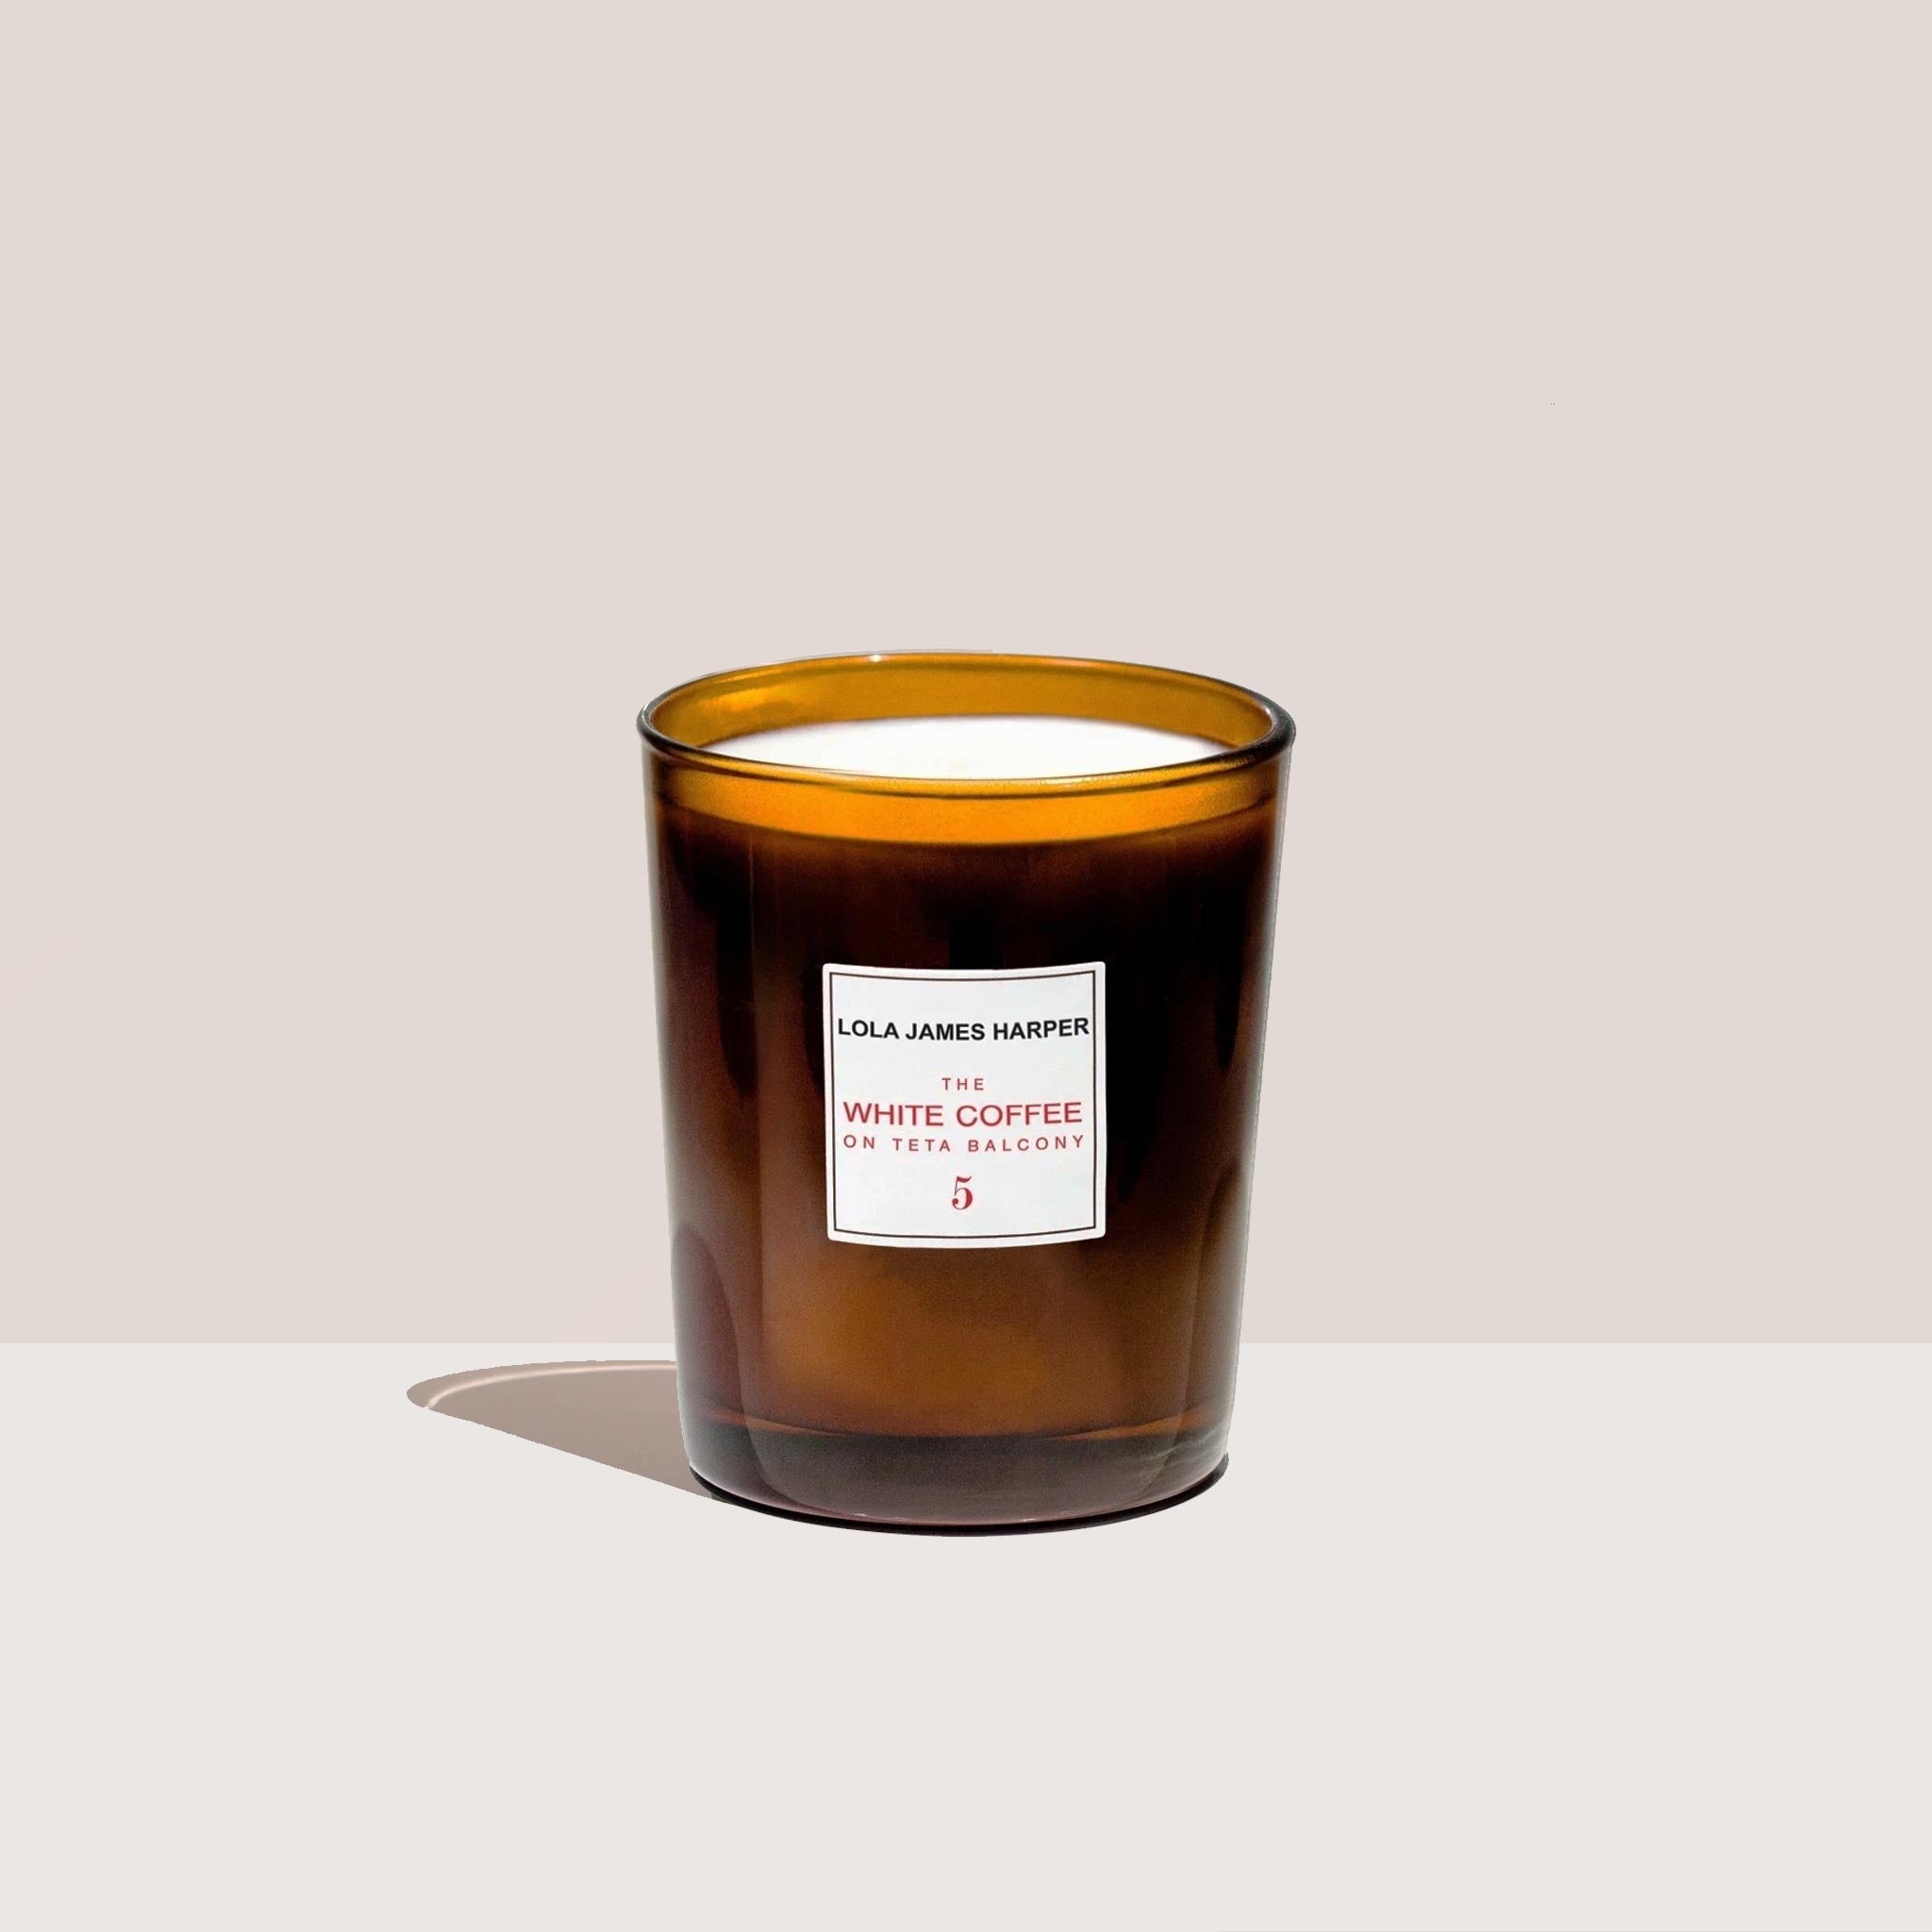 Lola James Harper - White Coffee Candle, available at LCD.